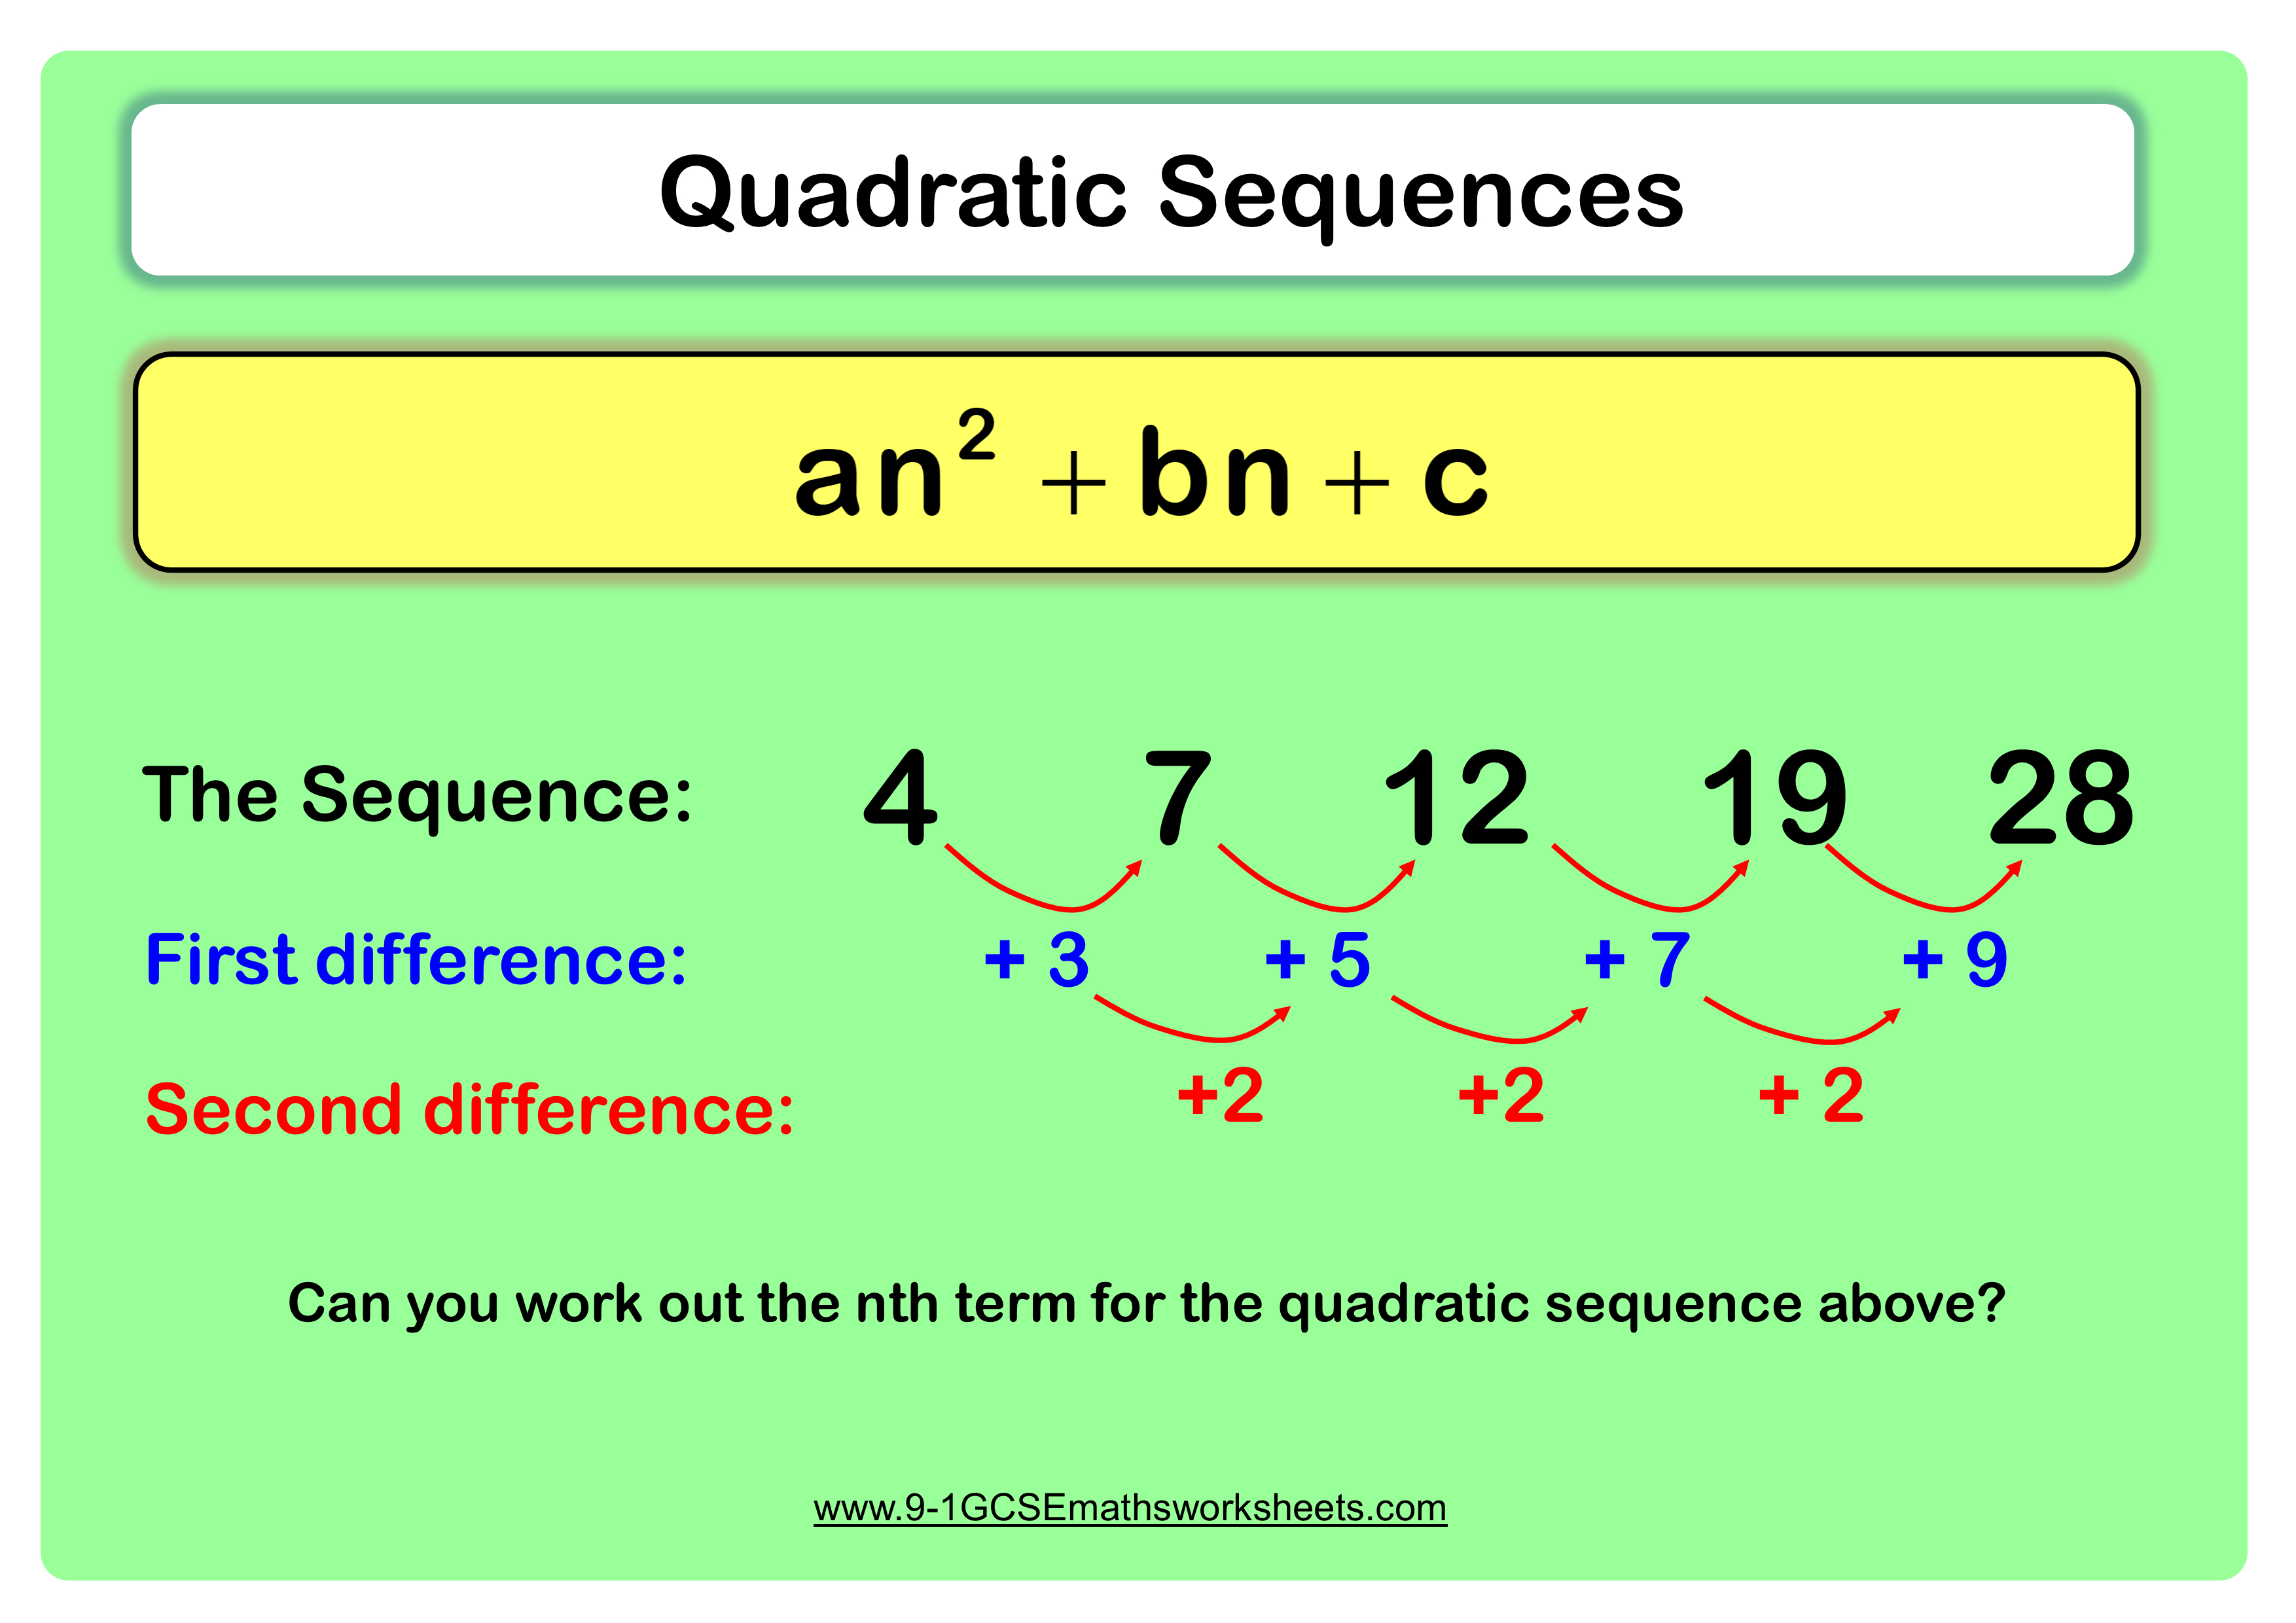 Quadratic Sequences Worksheet Practice Questions  Cazoomy